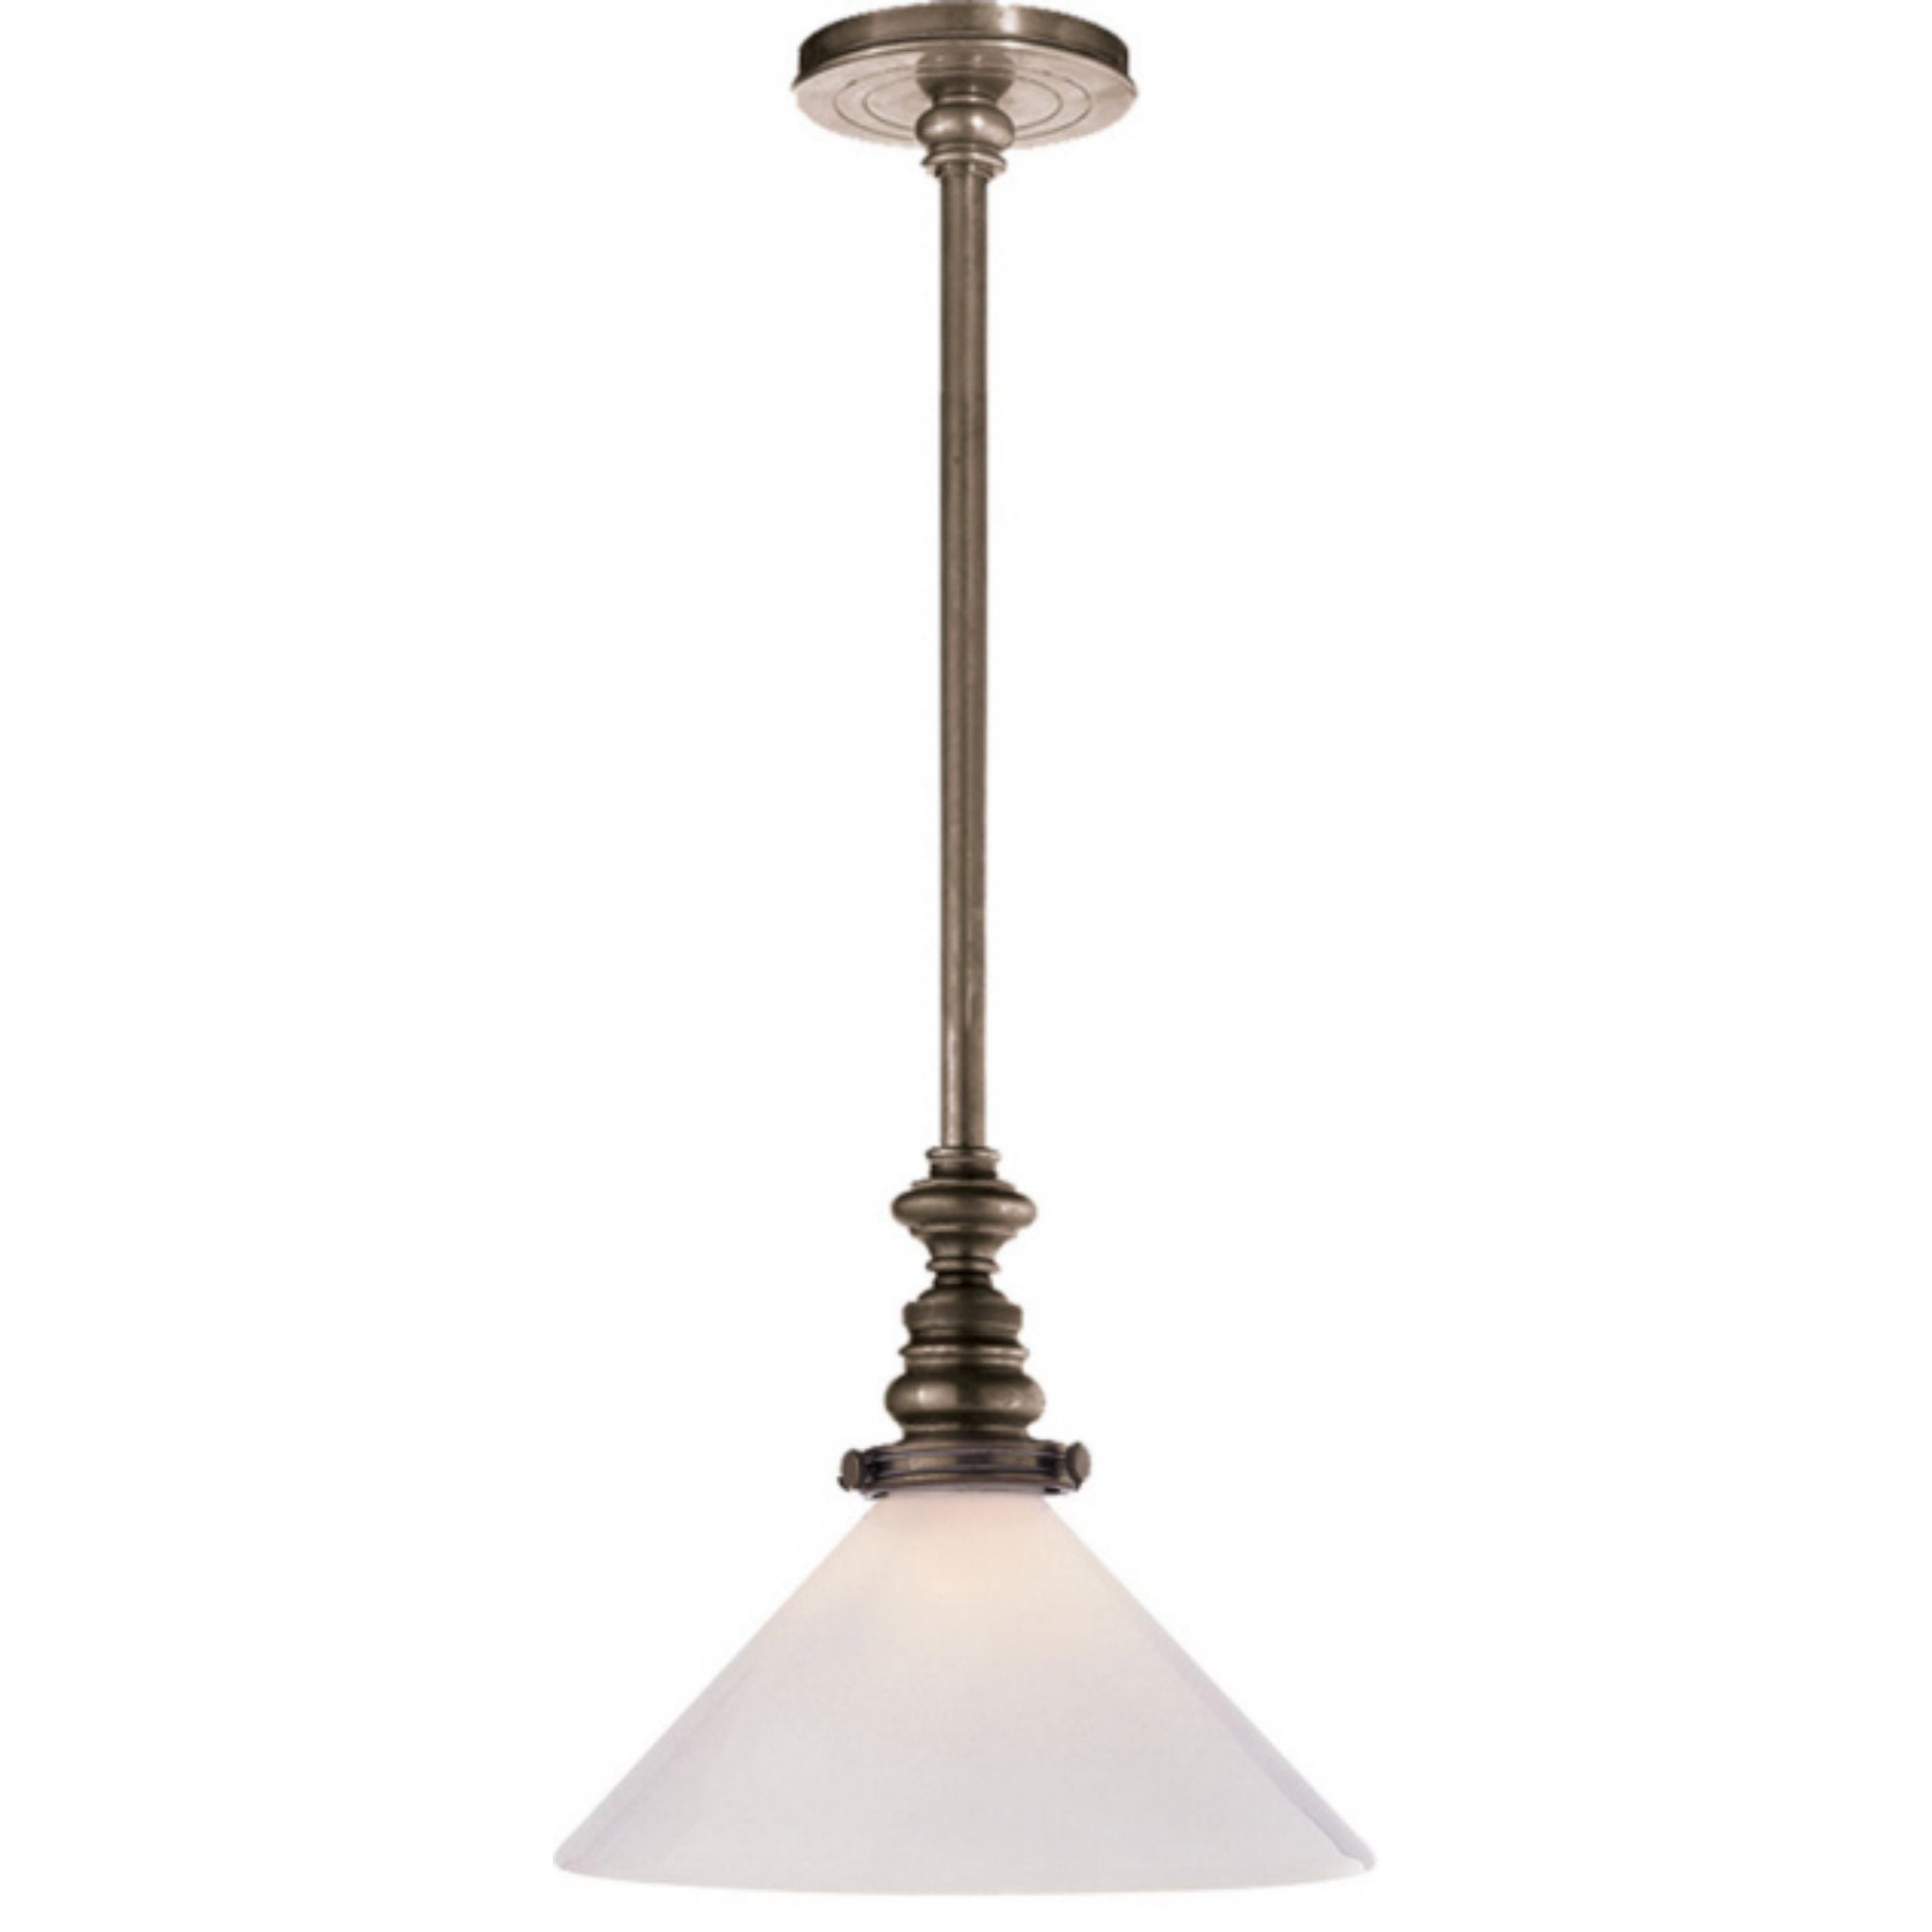 Chapman & Myers Boston Pendant in Antique Nickel with White Glass Slant Shade